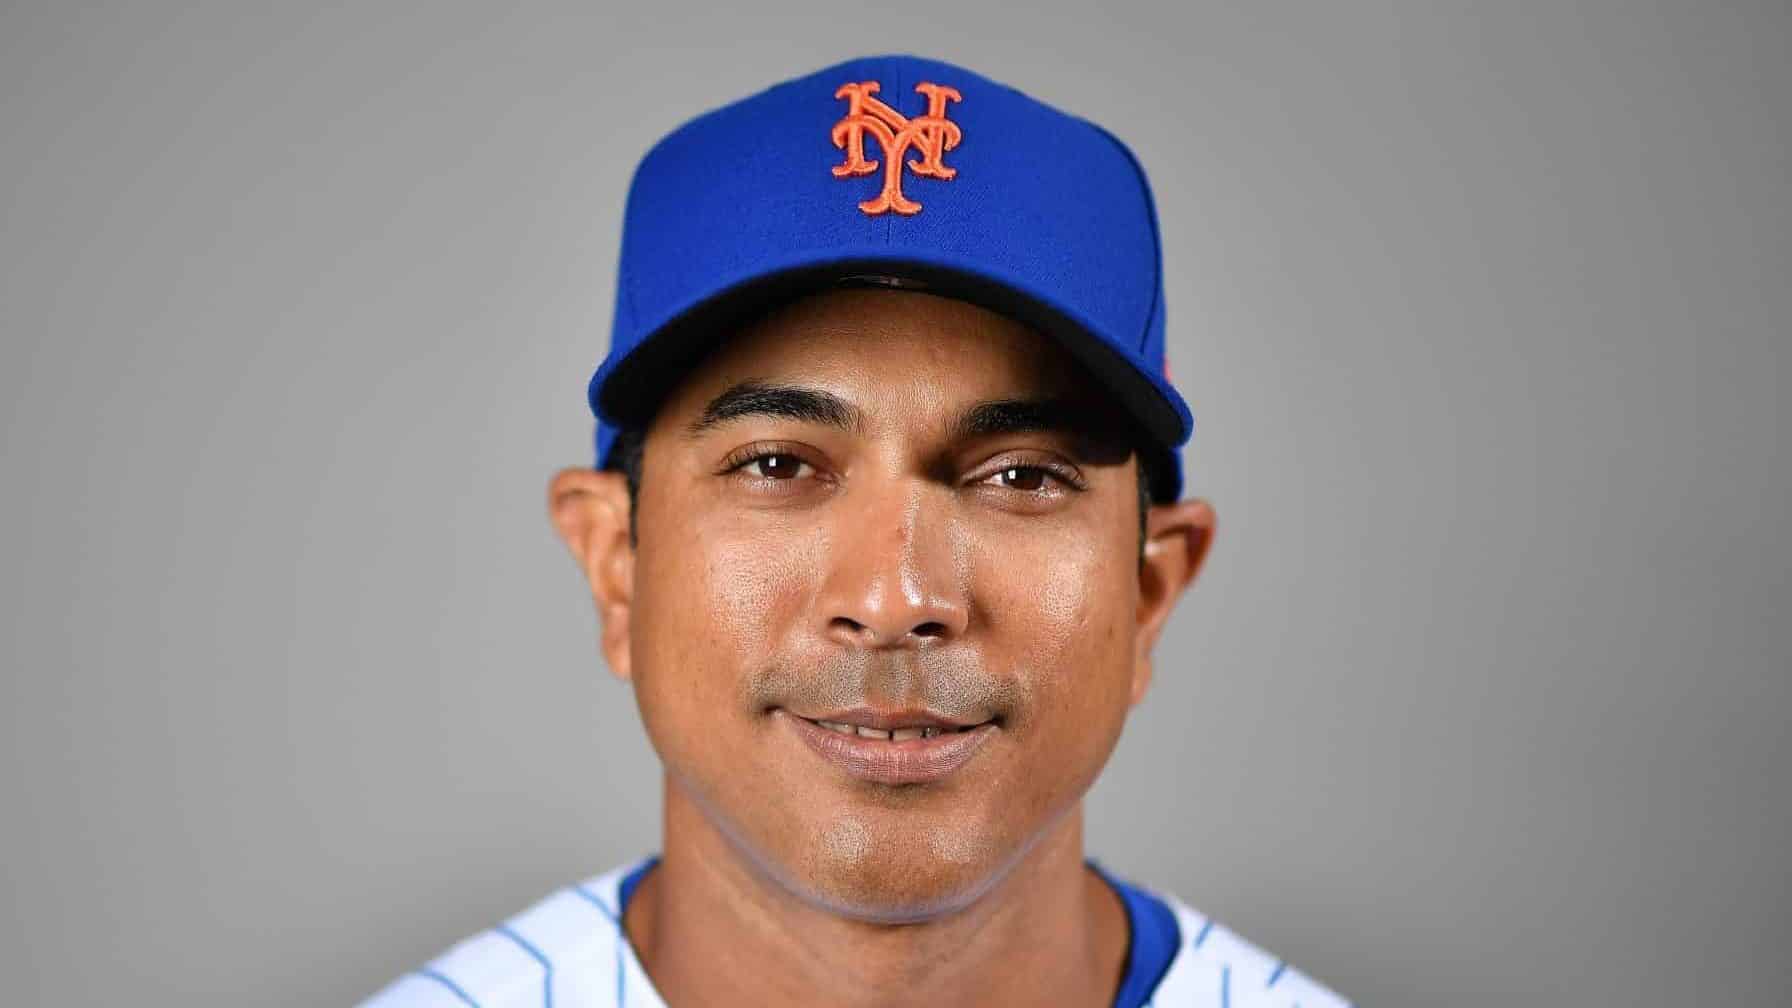 PORT ST. LUCIE, FLORIDA - FEBRUARY 20: Manager Luis Rojas #19 of the New York Mets poses for a photo during Photo Day at Clover Park on February 20, 2020 in Port St. Lucie, Florida.